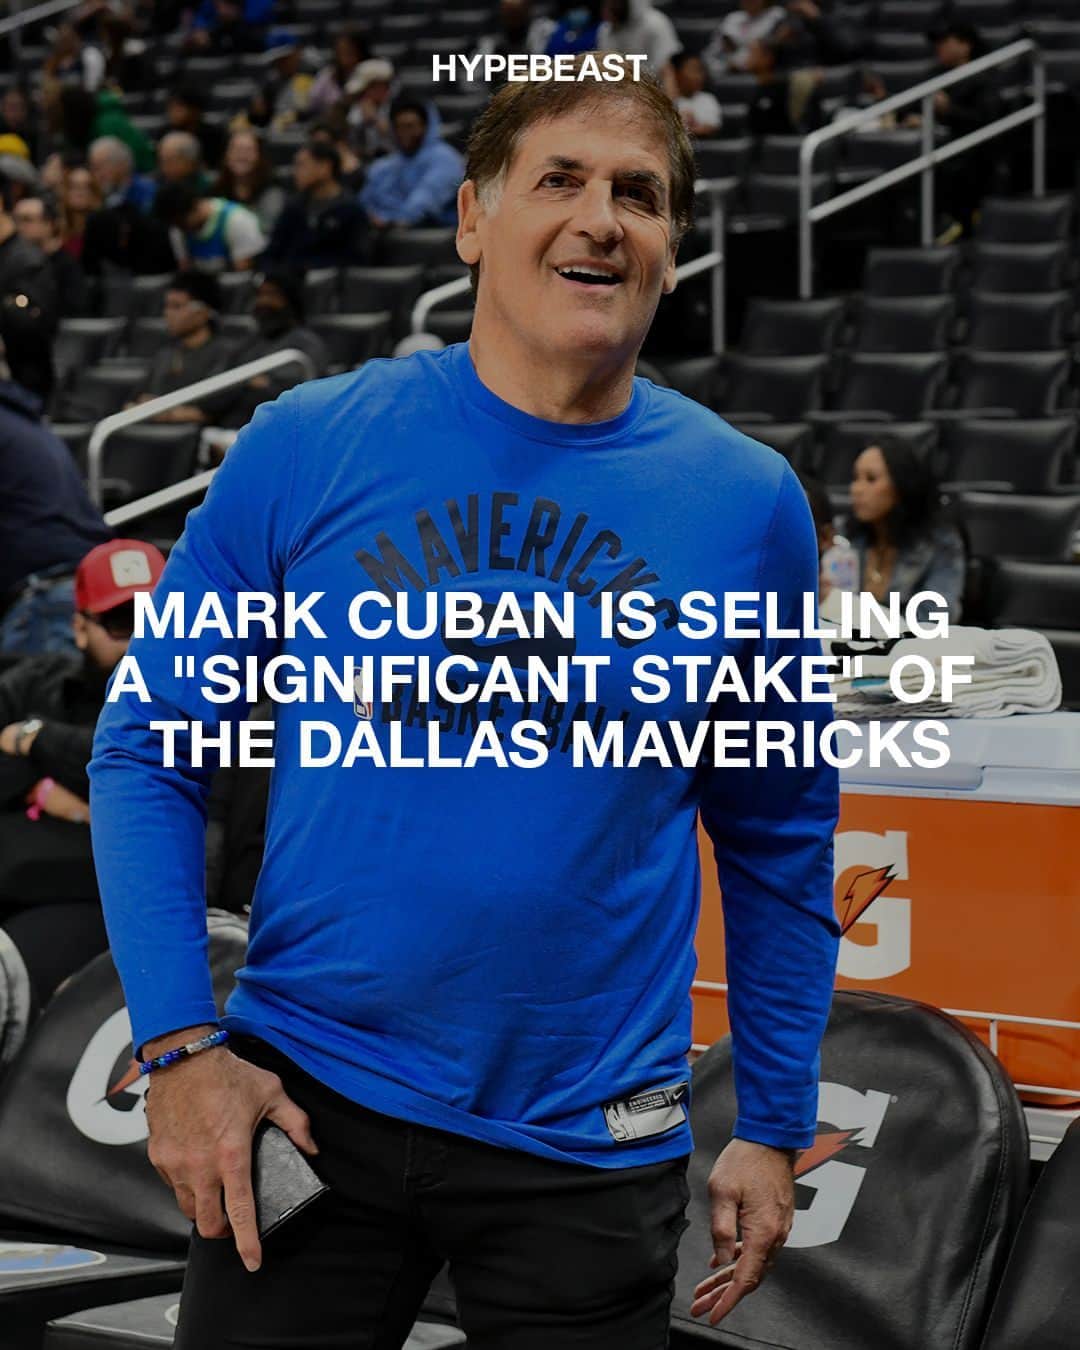 HYPEBEASTのインスタグラム：「According to reports, @mcuban is selling a majority stake of the @dallasmavs to billionaire Miriam Adelson. Industry insider @thesteinline has reported that “the Adelson family is in the process” of buying its way into the ownership of the @nba franchise, which has been owned by Cuban since 2000. While he is selling a “significant stake,” Cuban is said to “continue to retain operational and control of the team.”⁠ ⁠ Miriam Andelson, who is part of the Adelson family that owns the Las Vegas Sands, recently sold $2 billion USD worth of her Sands stock with the intention of investing in a sports franchise. ESPN has additionally reported that Cuban is nearing a deal with the family and discussions are quite advanced. The agreement is expected to be in the valuation range of $3.5 billion USD.⁠ Photo:Allen Berezovsky/Getty Images」